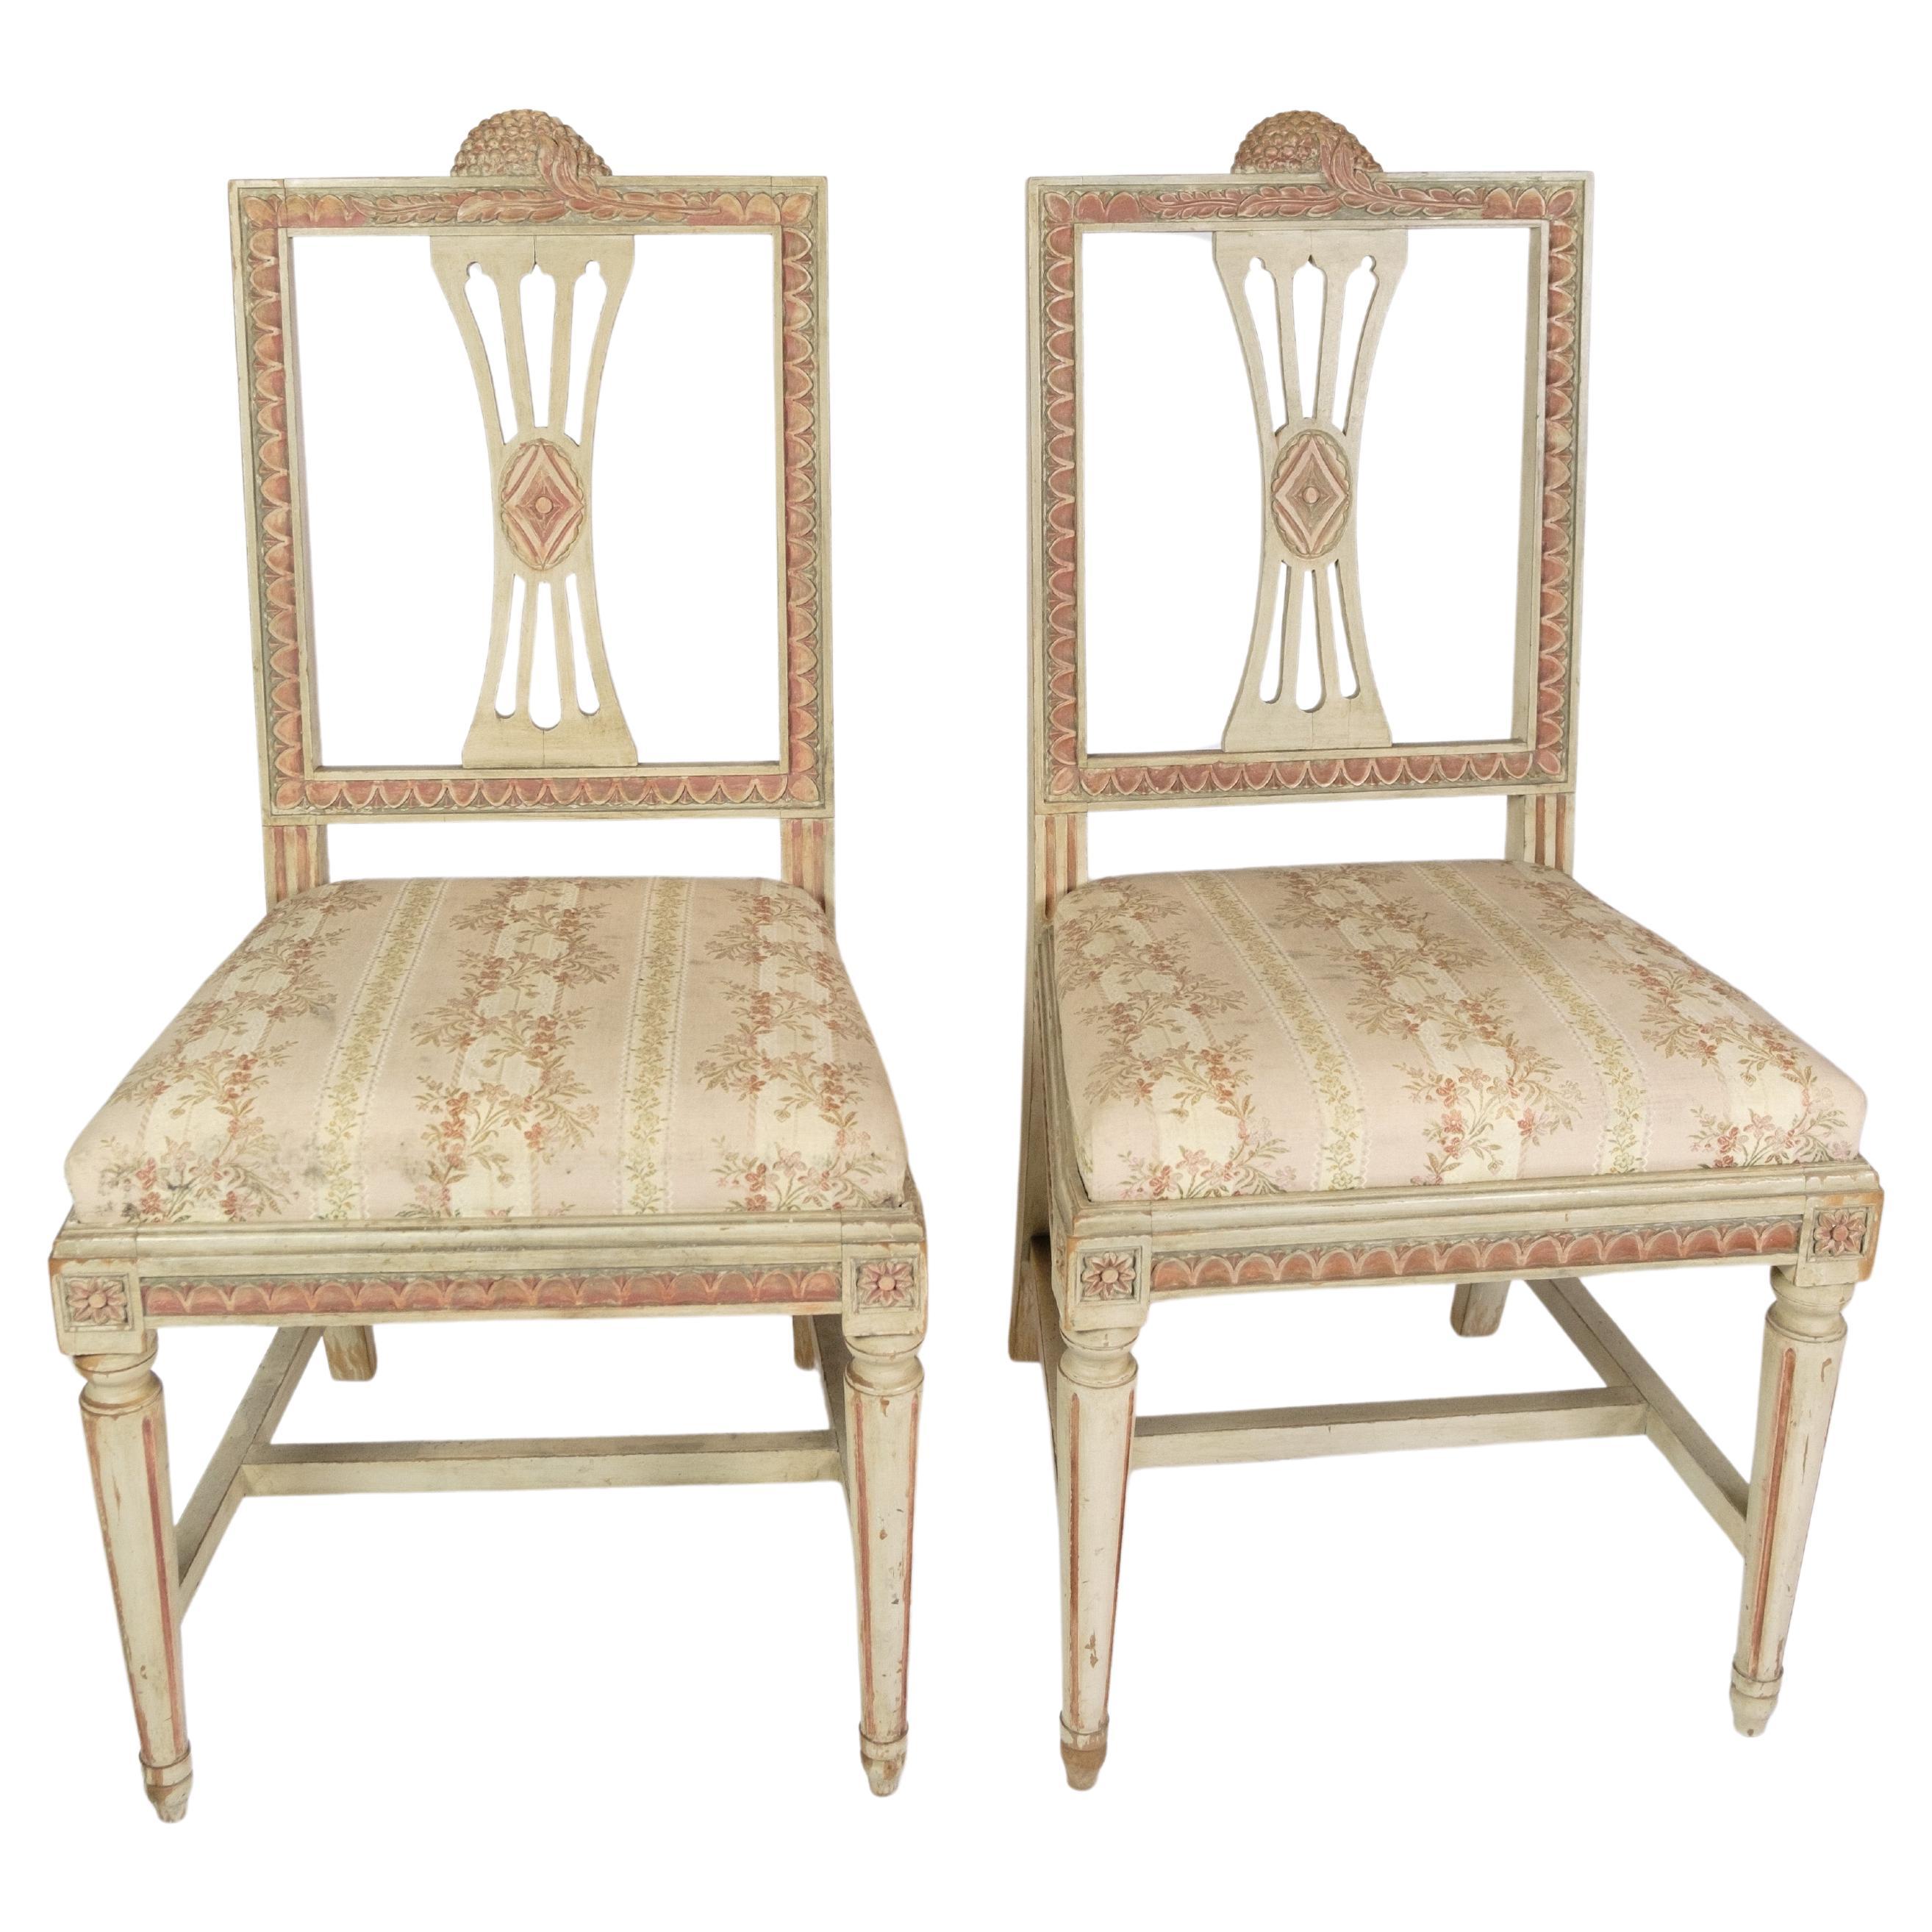 A Set Of 2 Gustavian Style Chairs From 1880s 